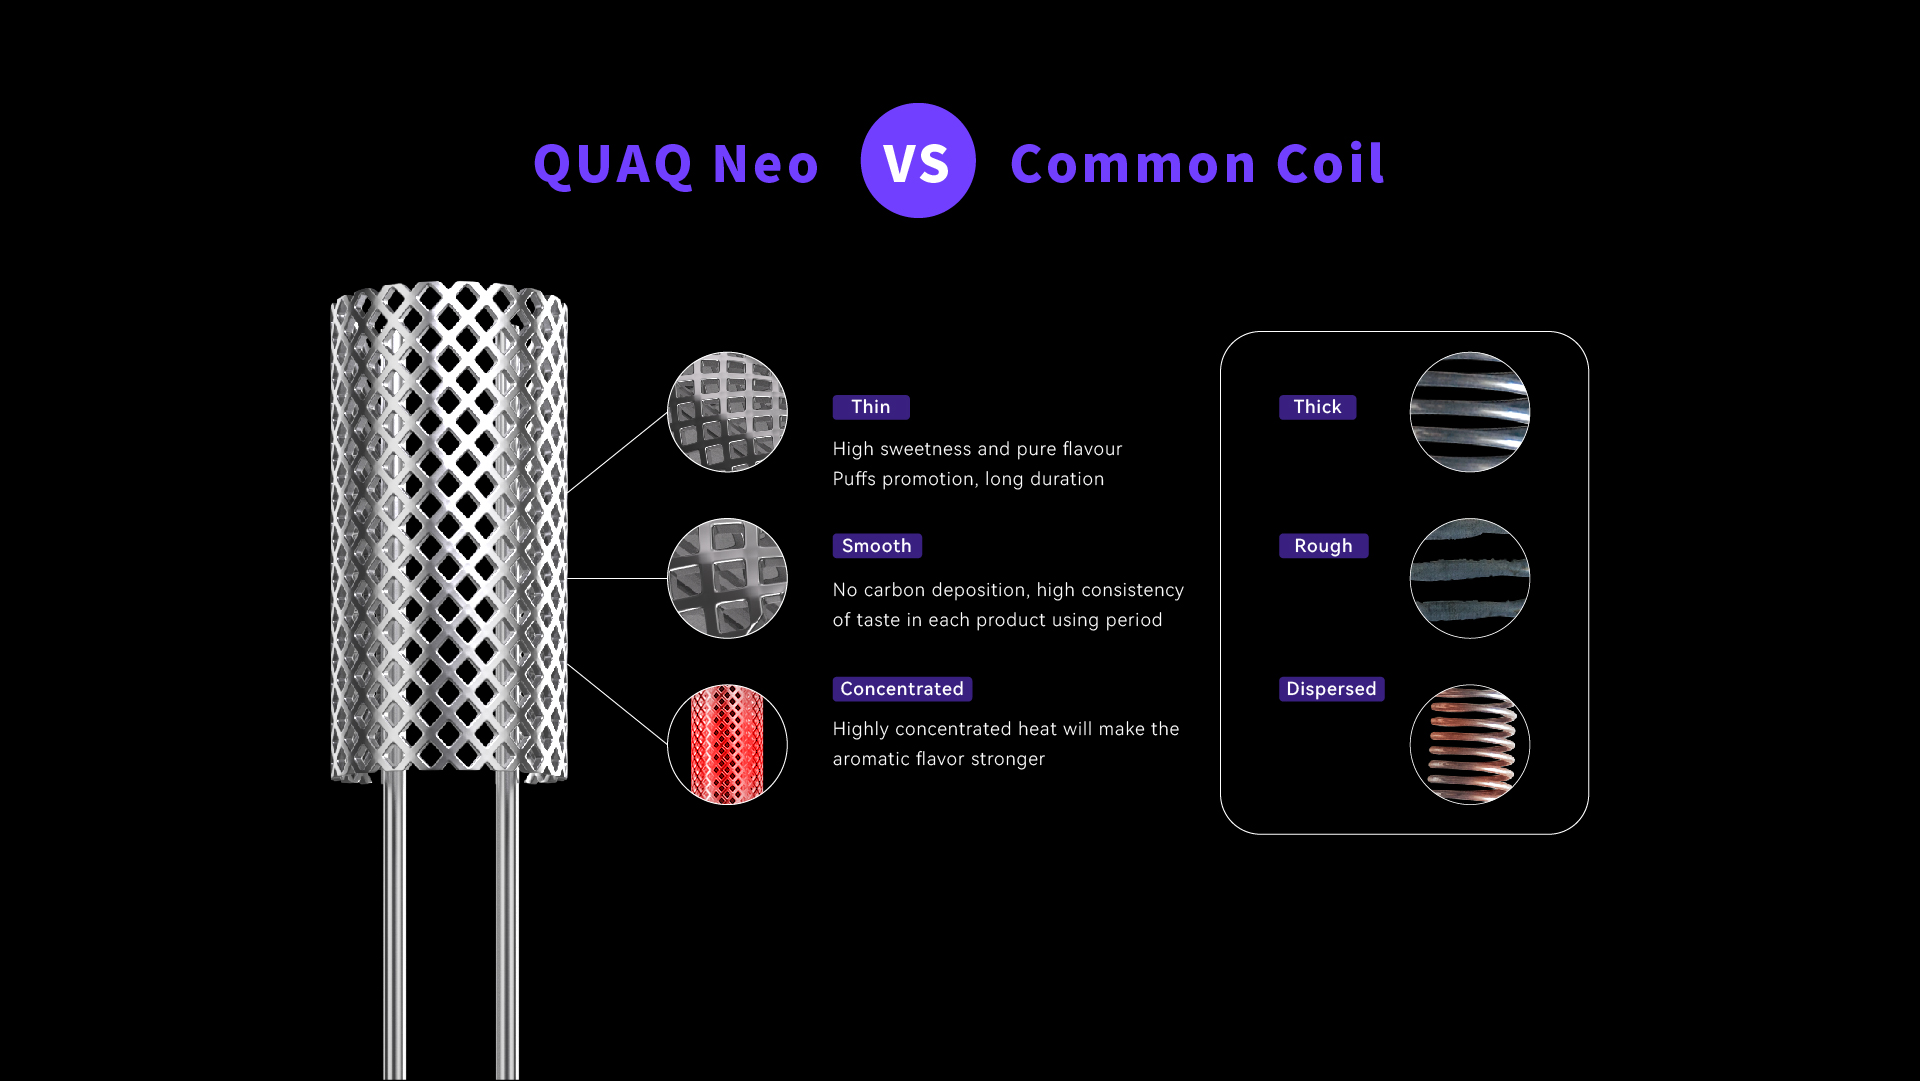 When compared to standard coils, quaq coils are thinner, smoother and have a higher concentration coil density.